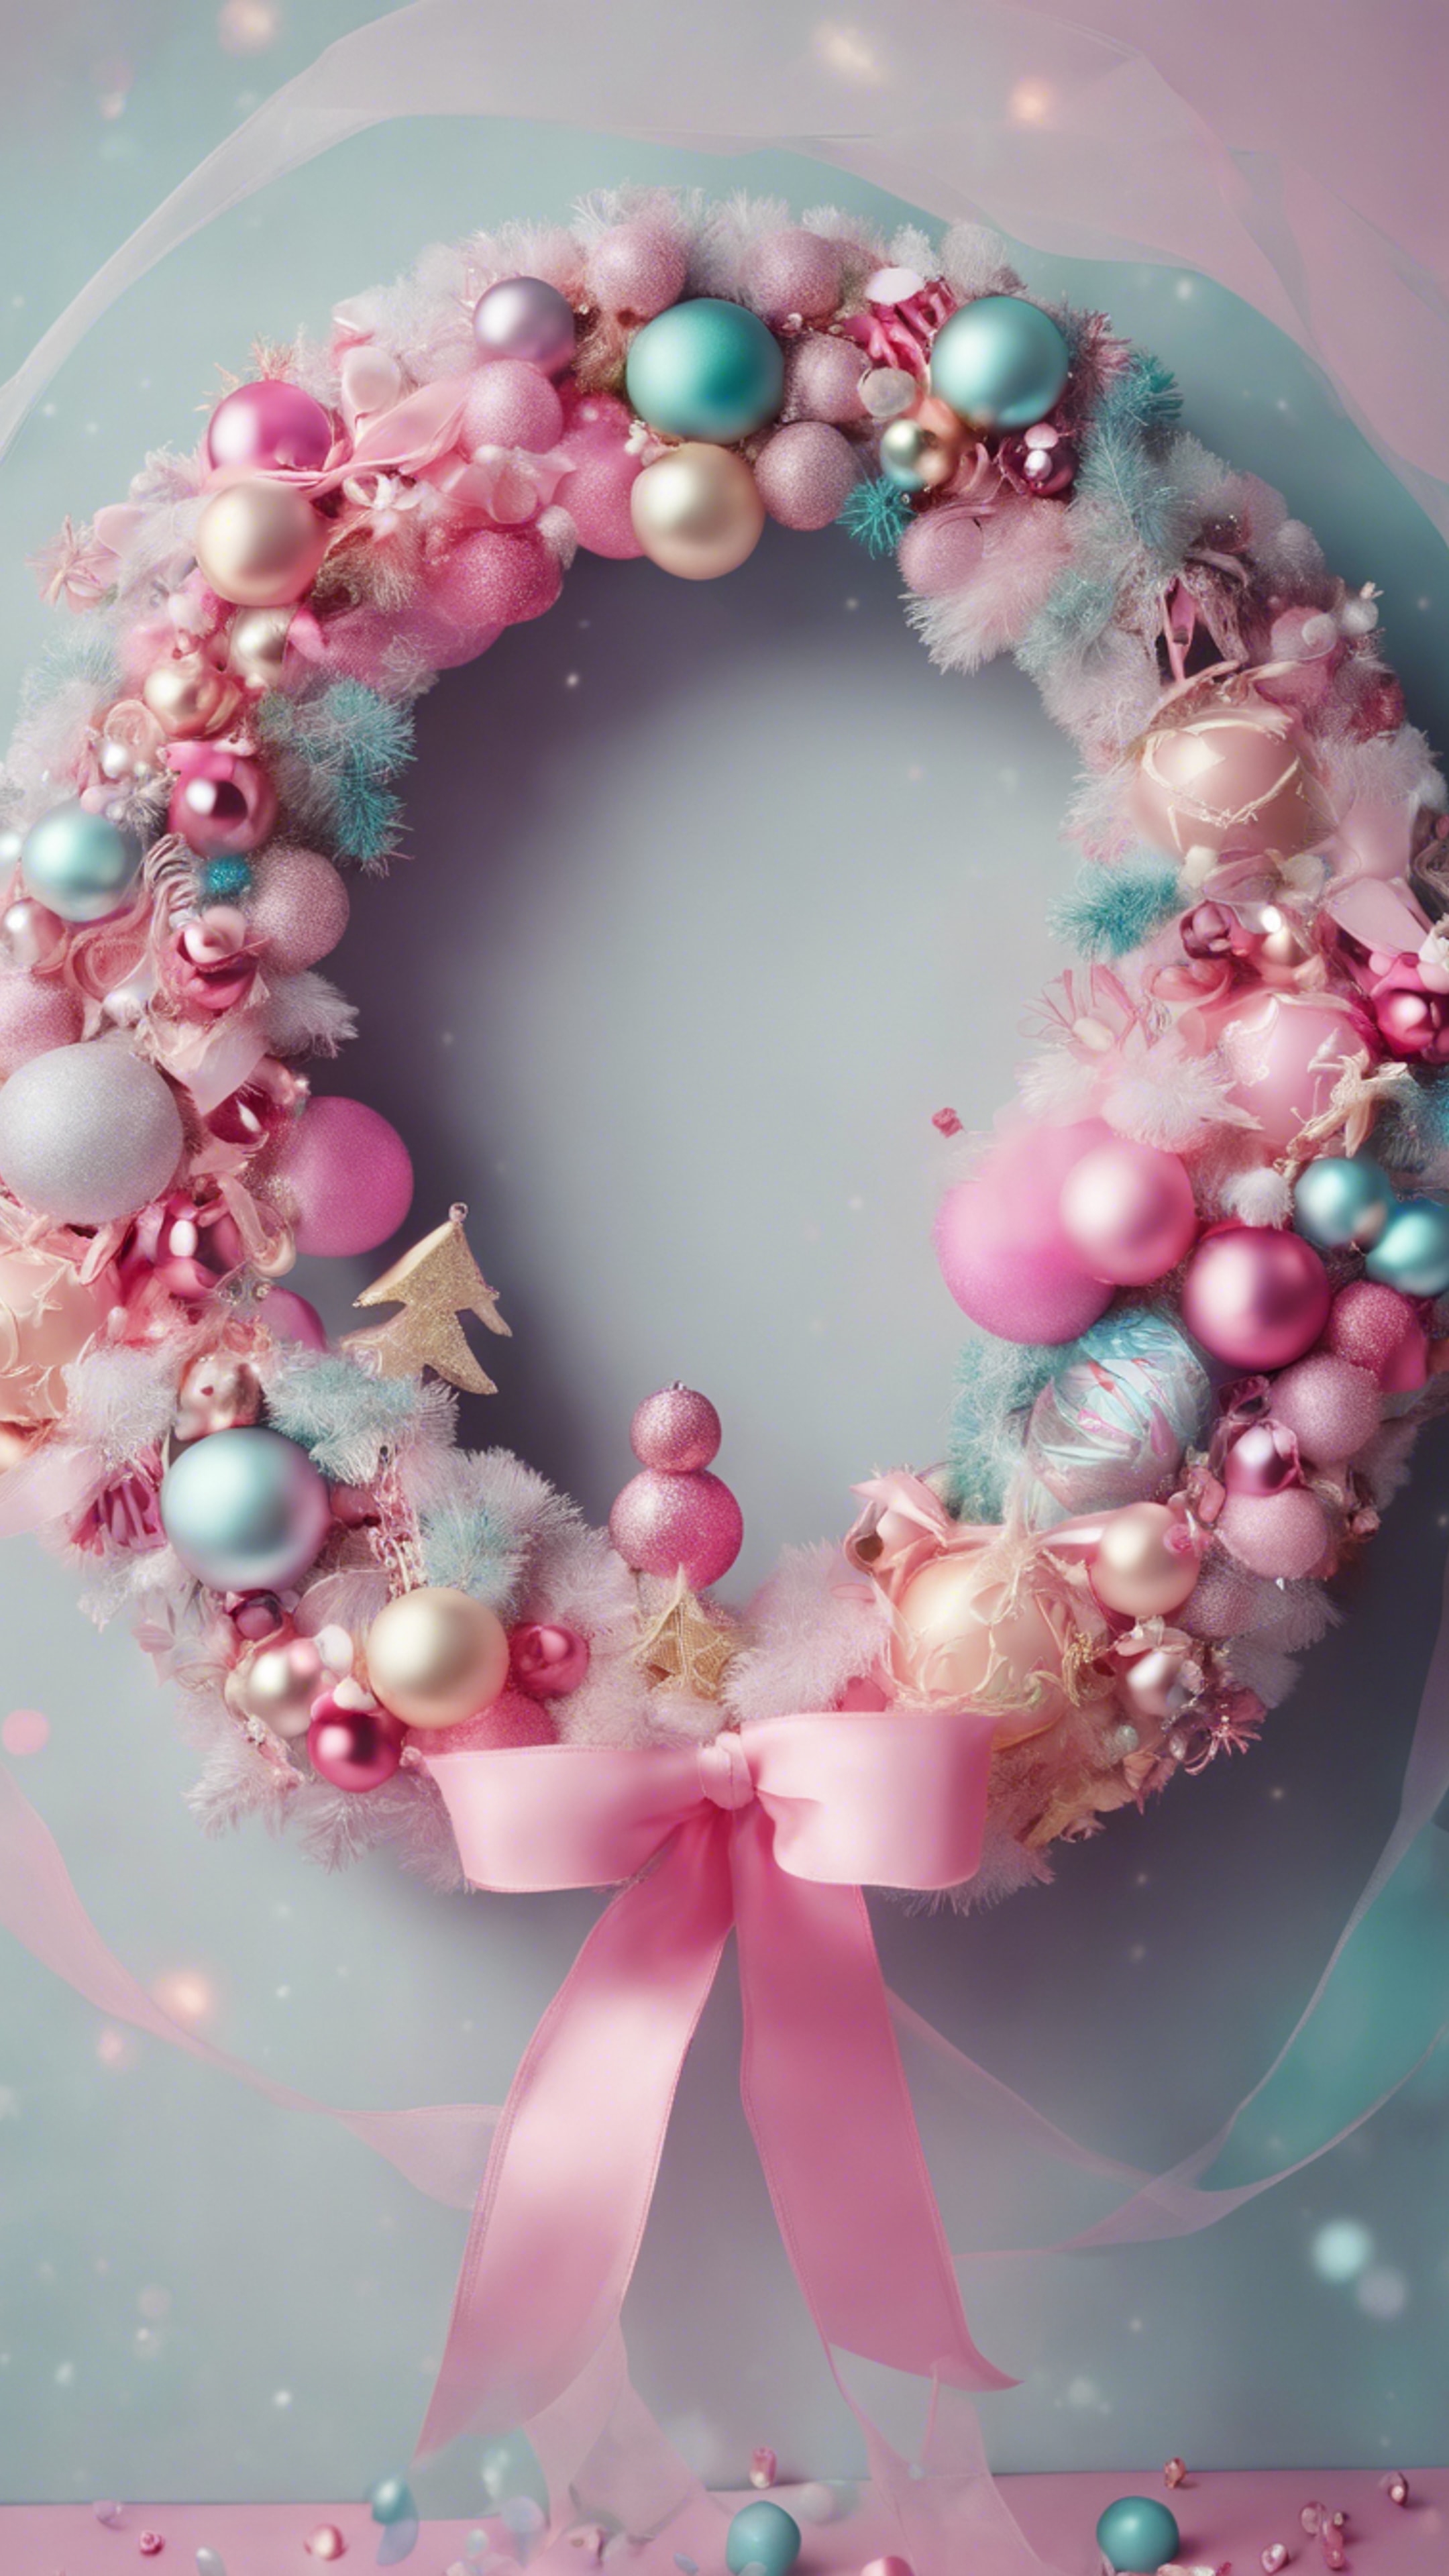 A Kawaii-inspired Christmas wreath adorned with bright pink and pastel ribbons and cute festive ornaments. 牆紙[4ef6f99b659d4f218ce6]